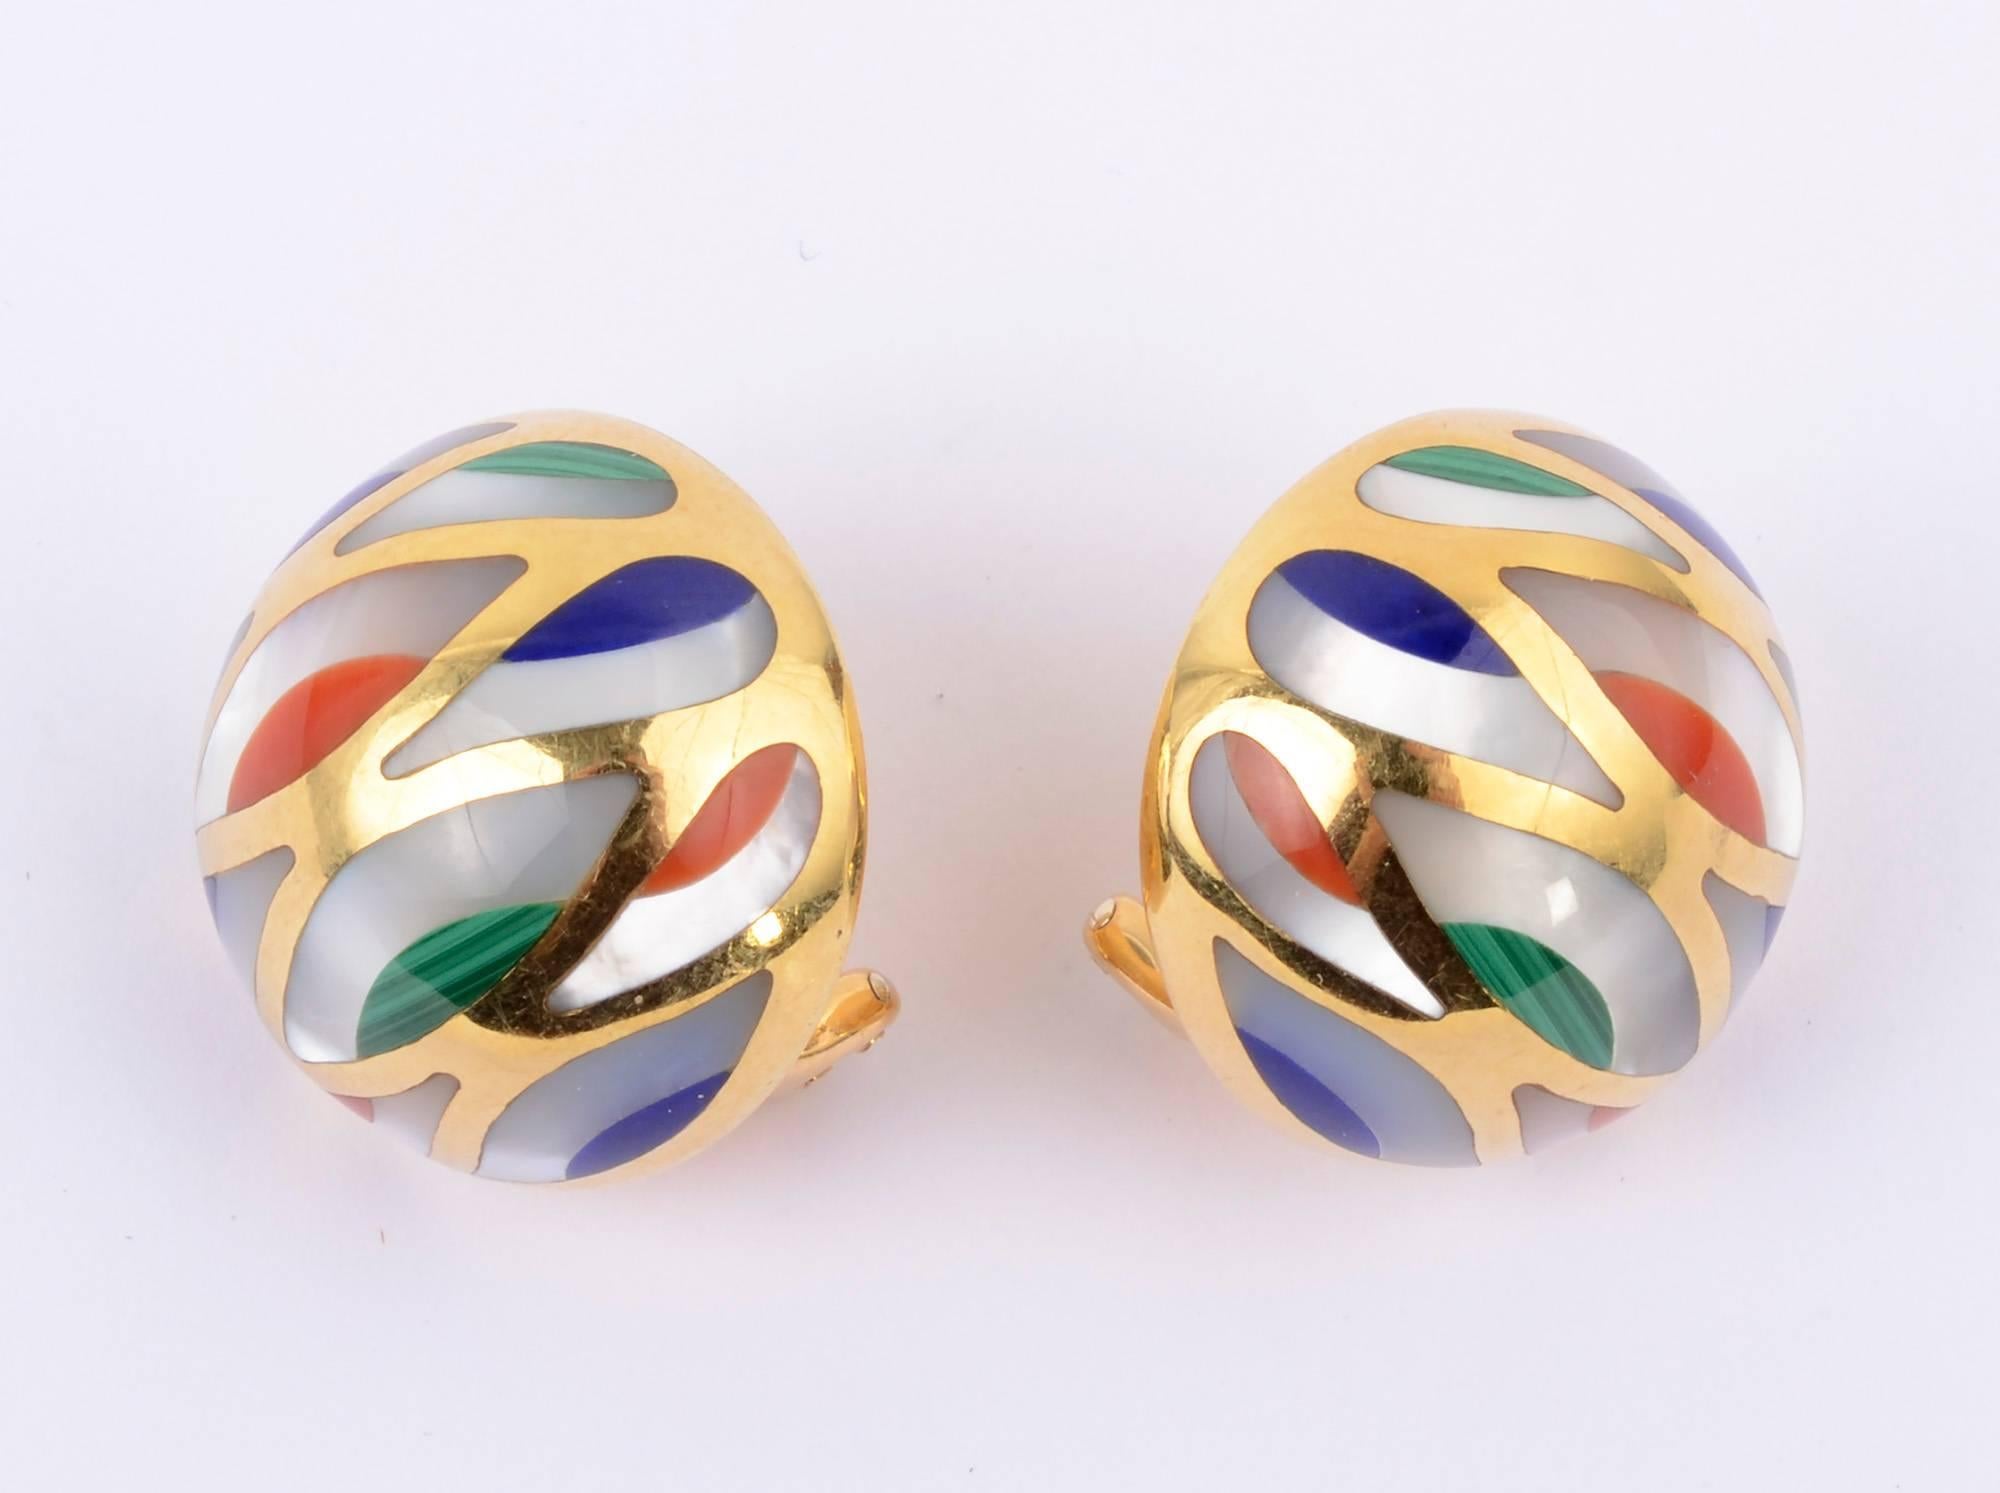 Colorful dome shaped earrings by Asch Grossbardt. They are set with mother of pearl; lapis lazuli; malachite and coral. Backs are clips and posts. They measure one inch in diameter.